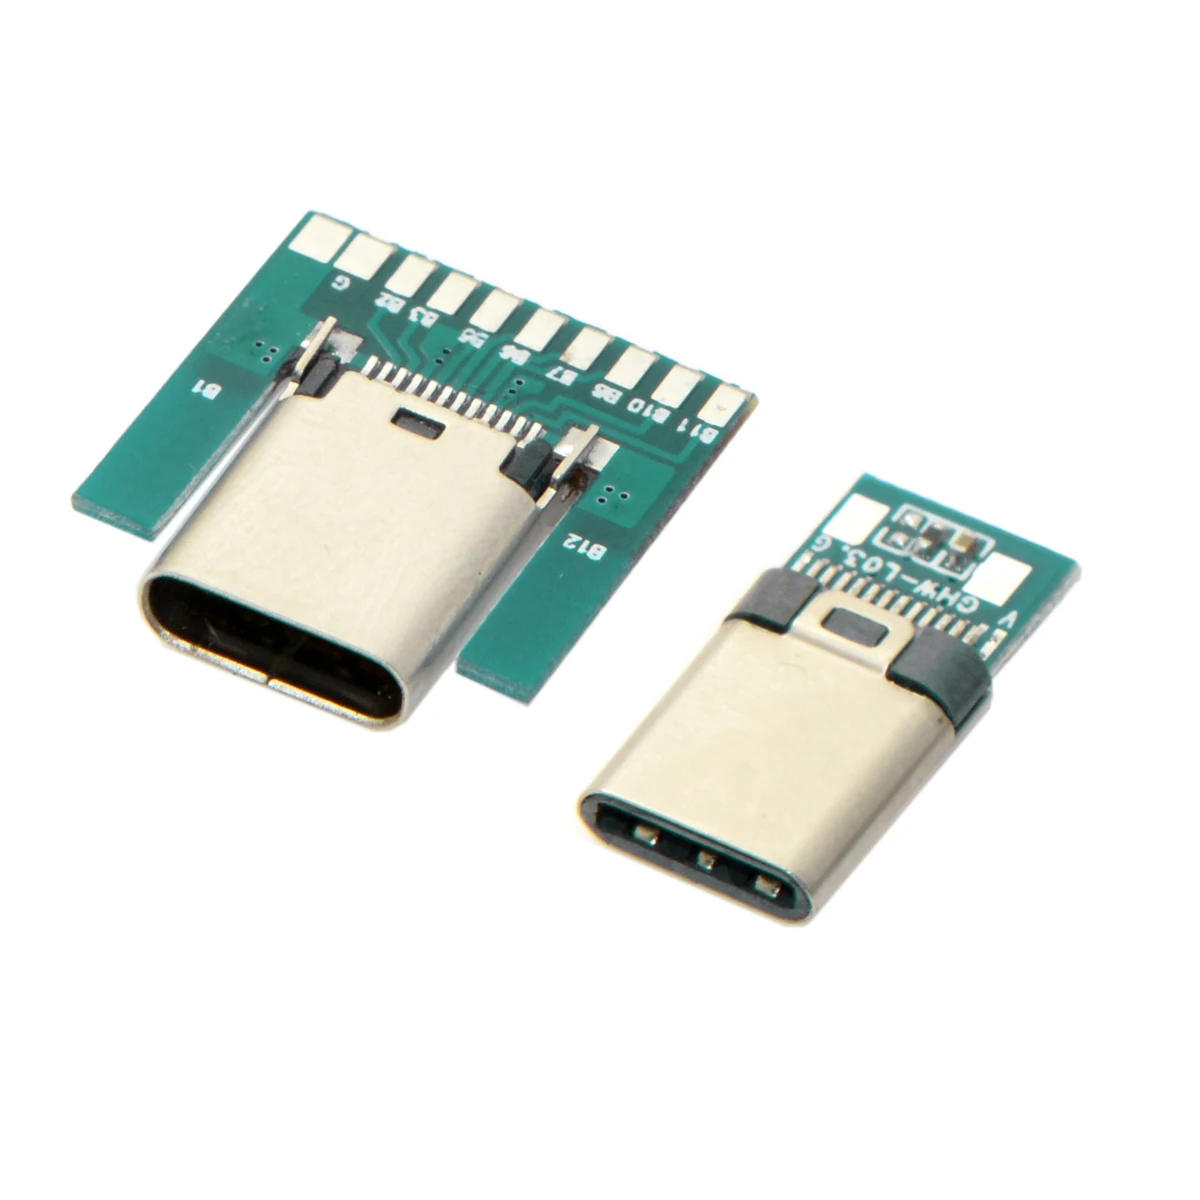 

CY DIY 24pin USB 3.1 Type C Male & Female Plug & Socket Connector SMT type with PC Board 1 set